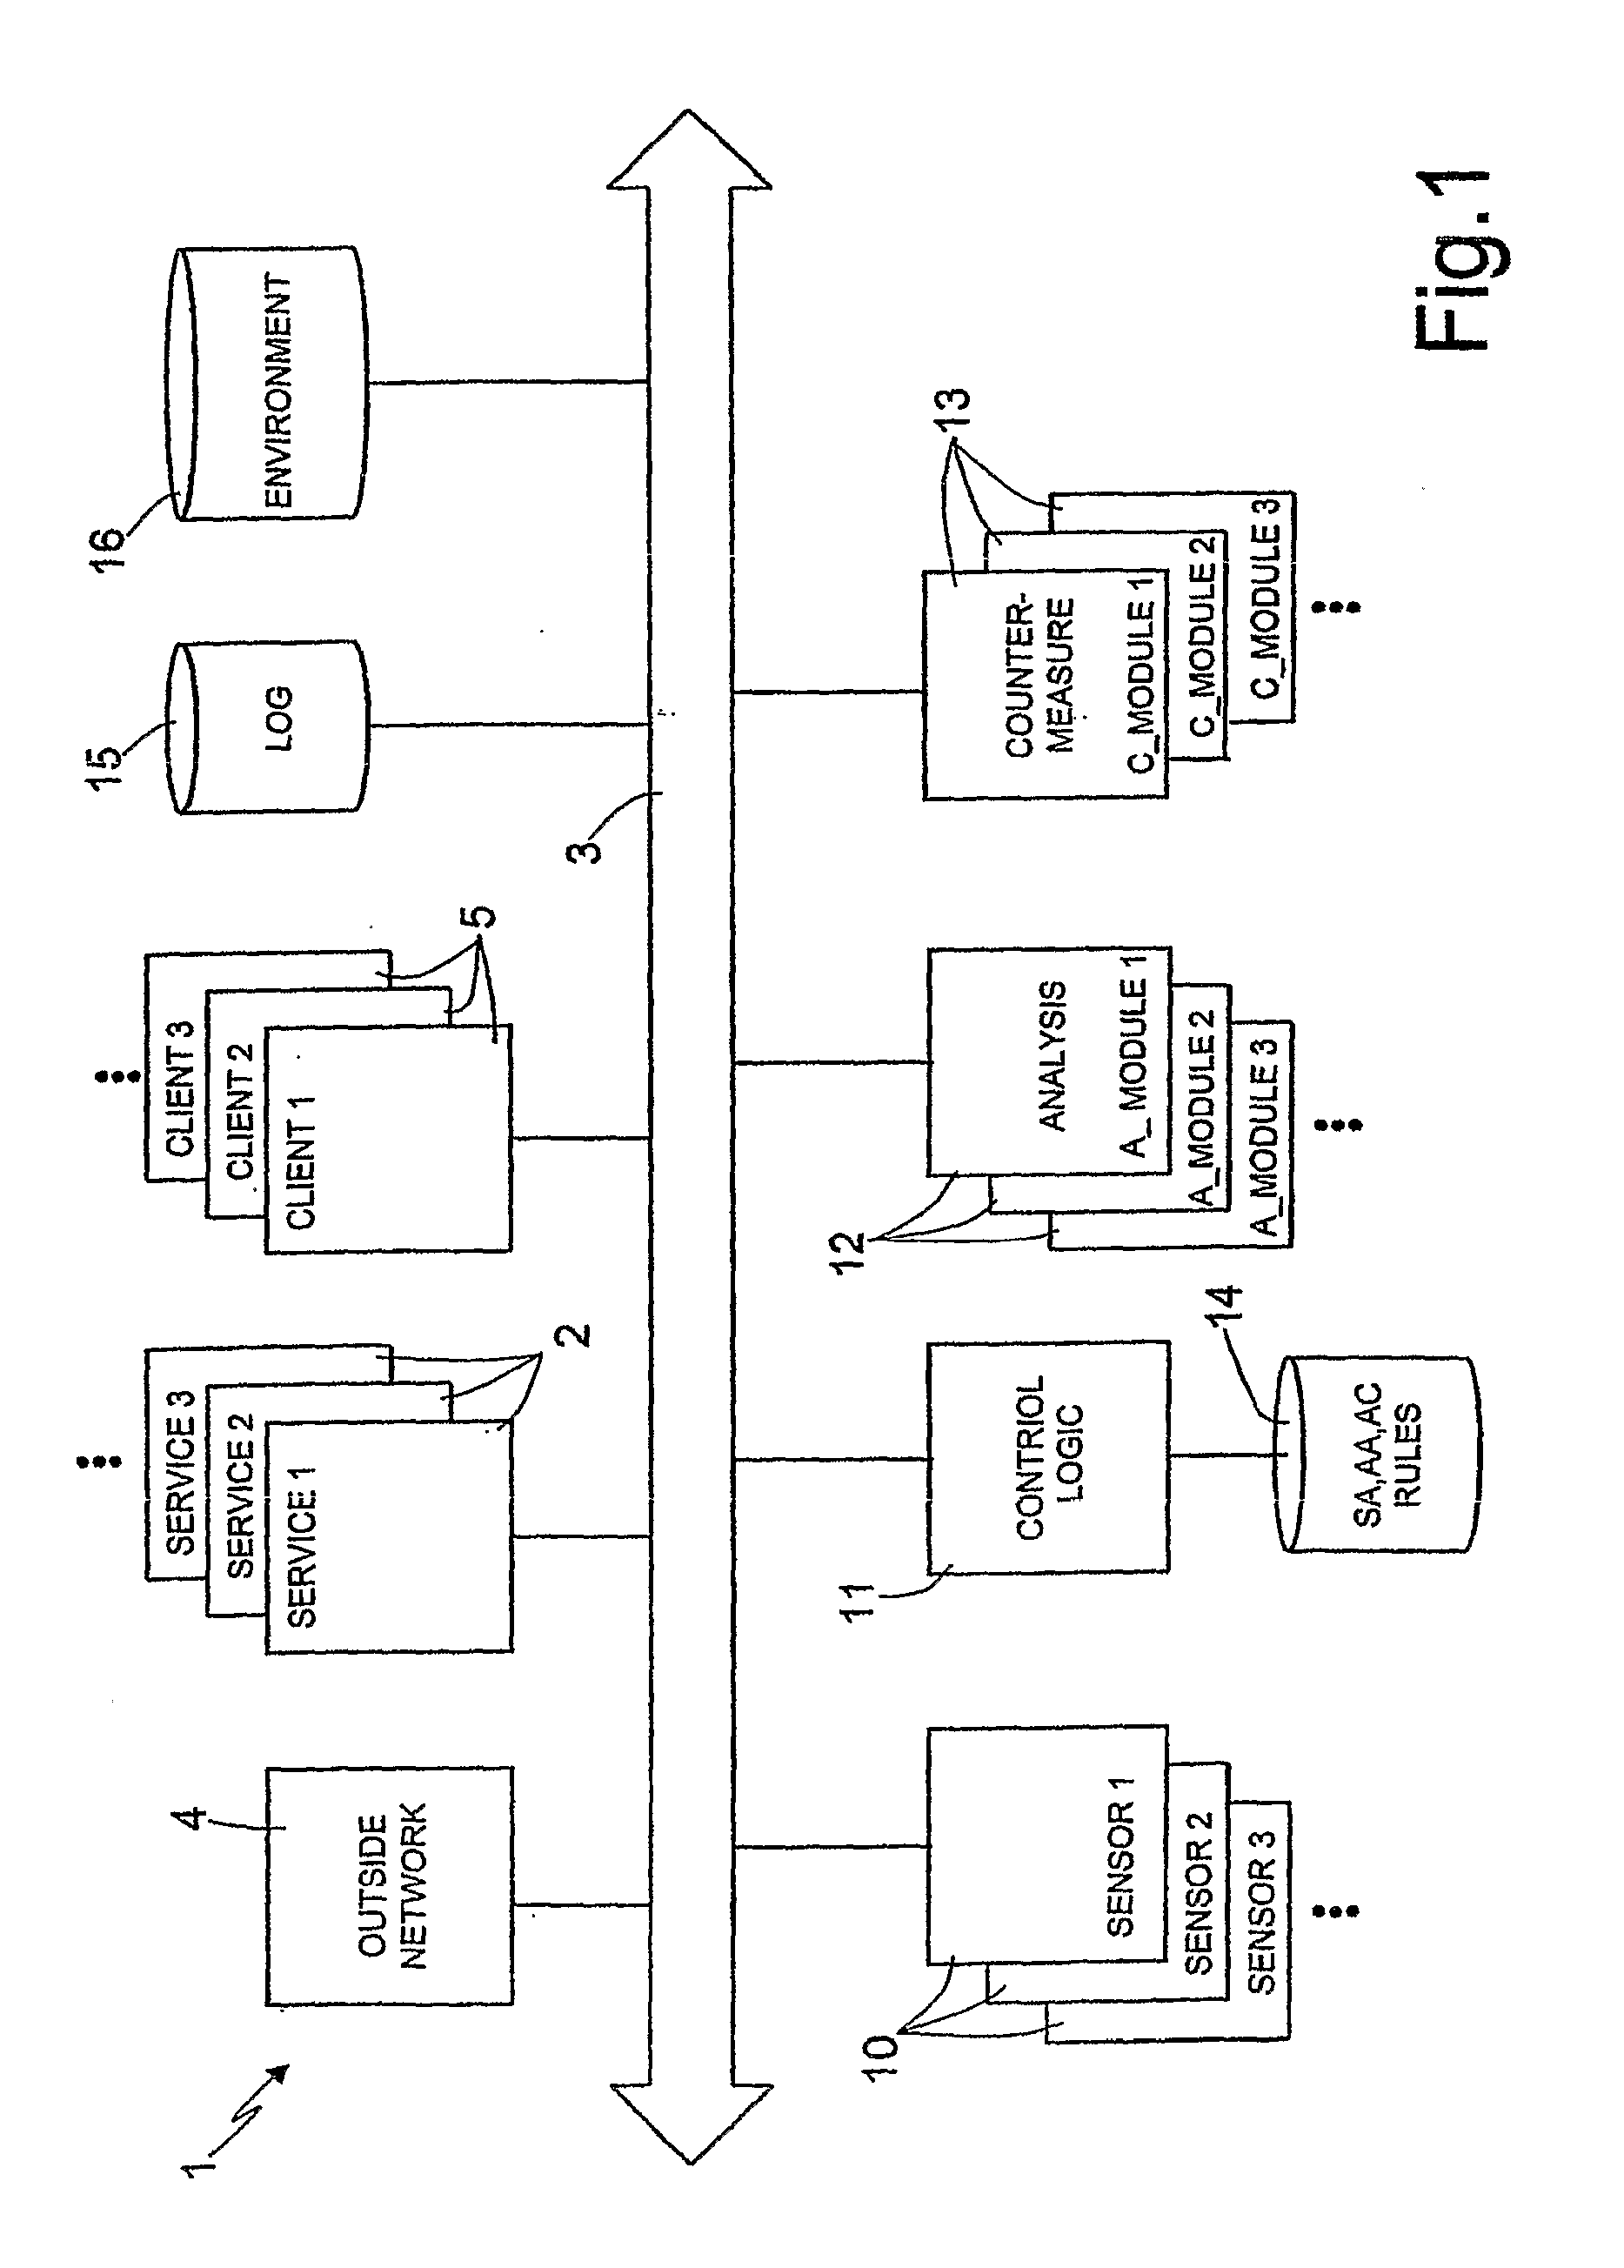 Method and System for Managing Denial of Service Situations